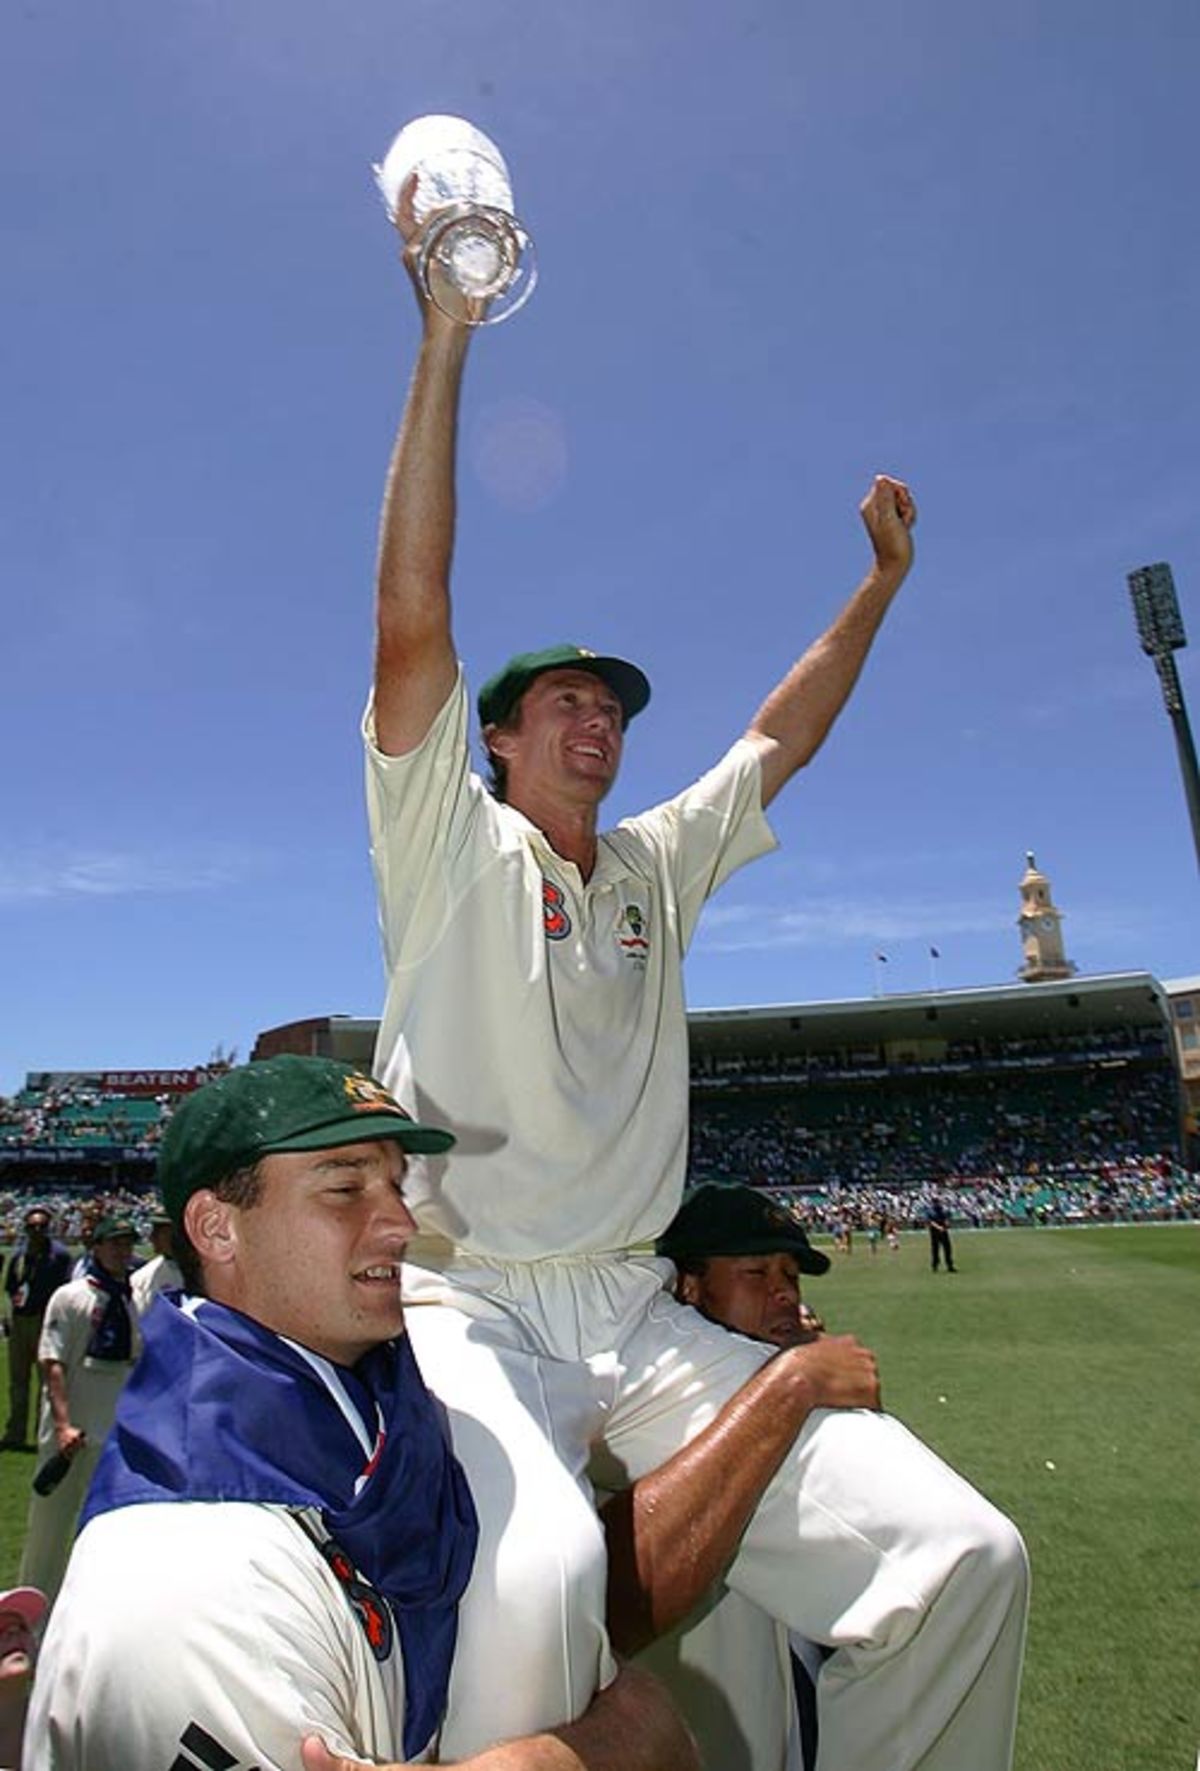 Glenn Mcgrath acknowledging the crowd after playing his final test at Sydney on 5 January 2007